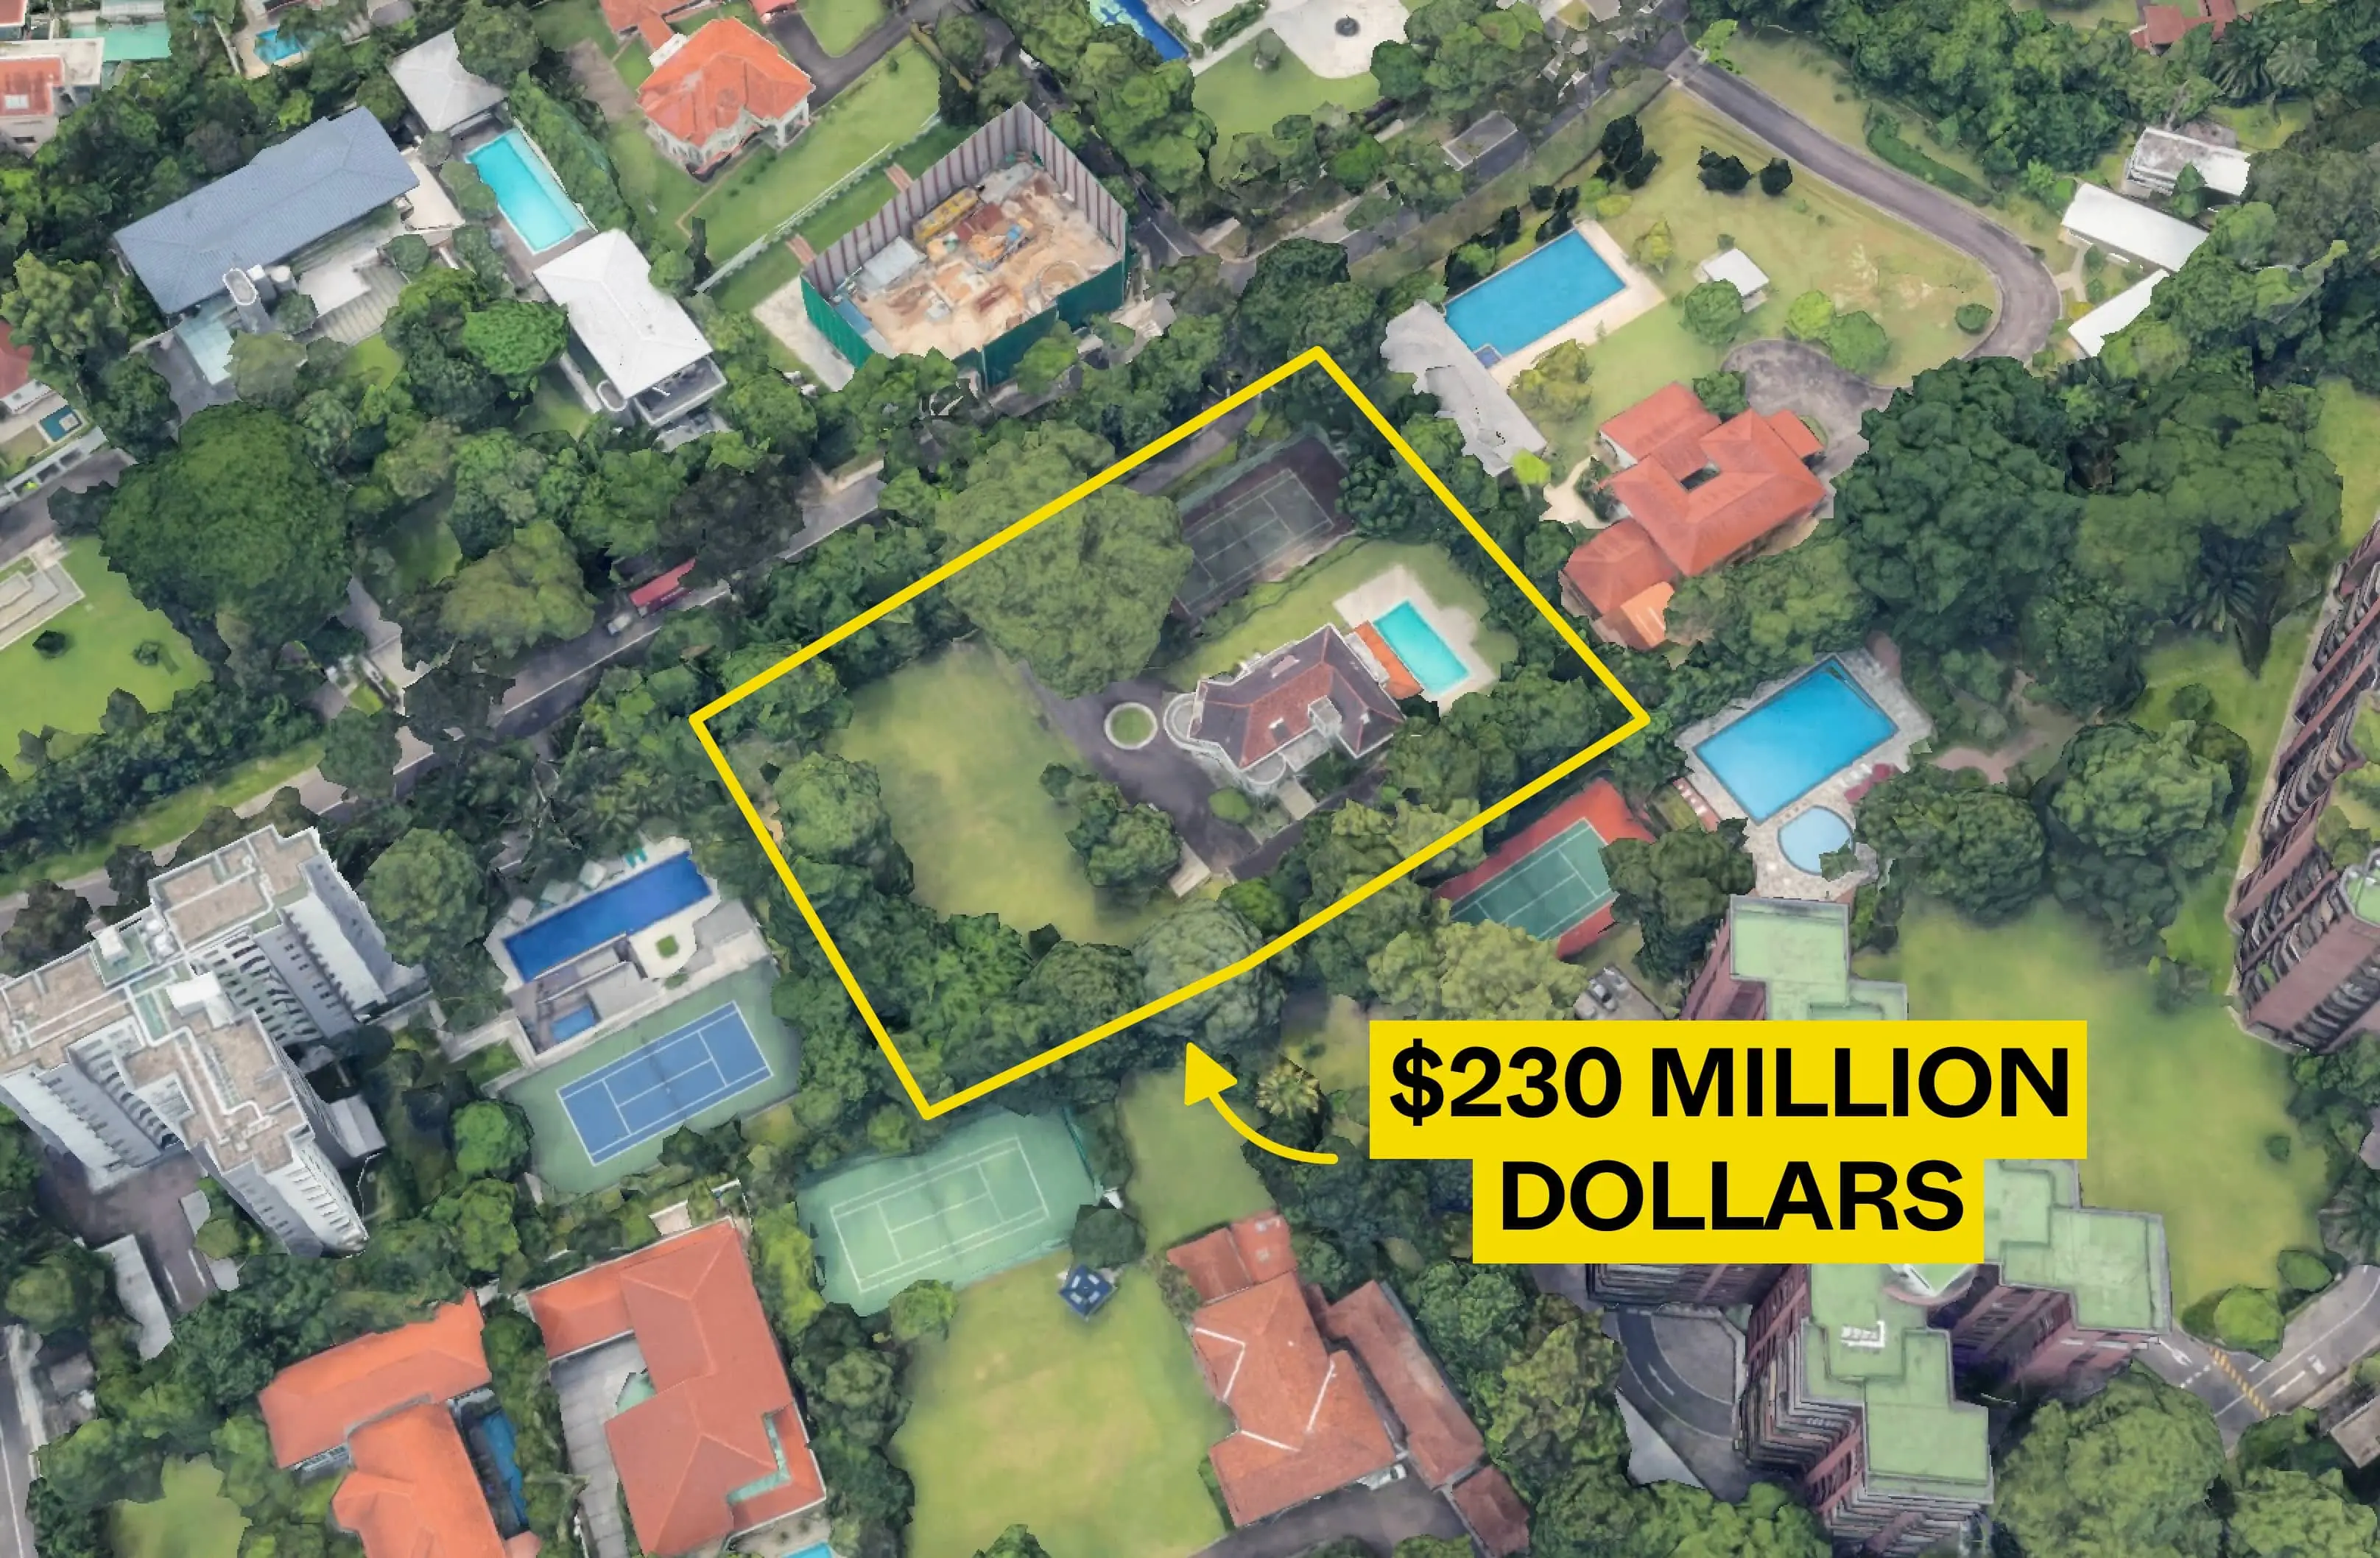 most expensive property singapore